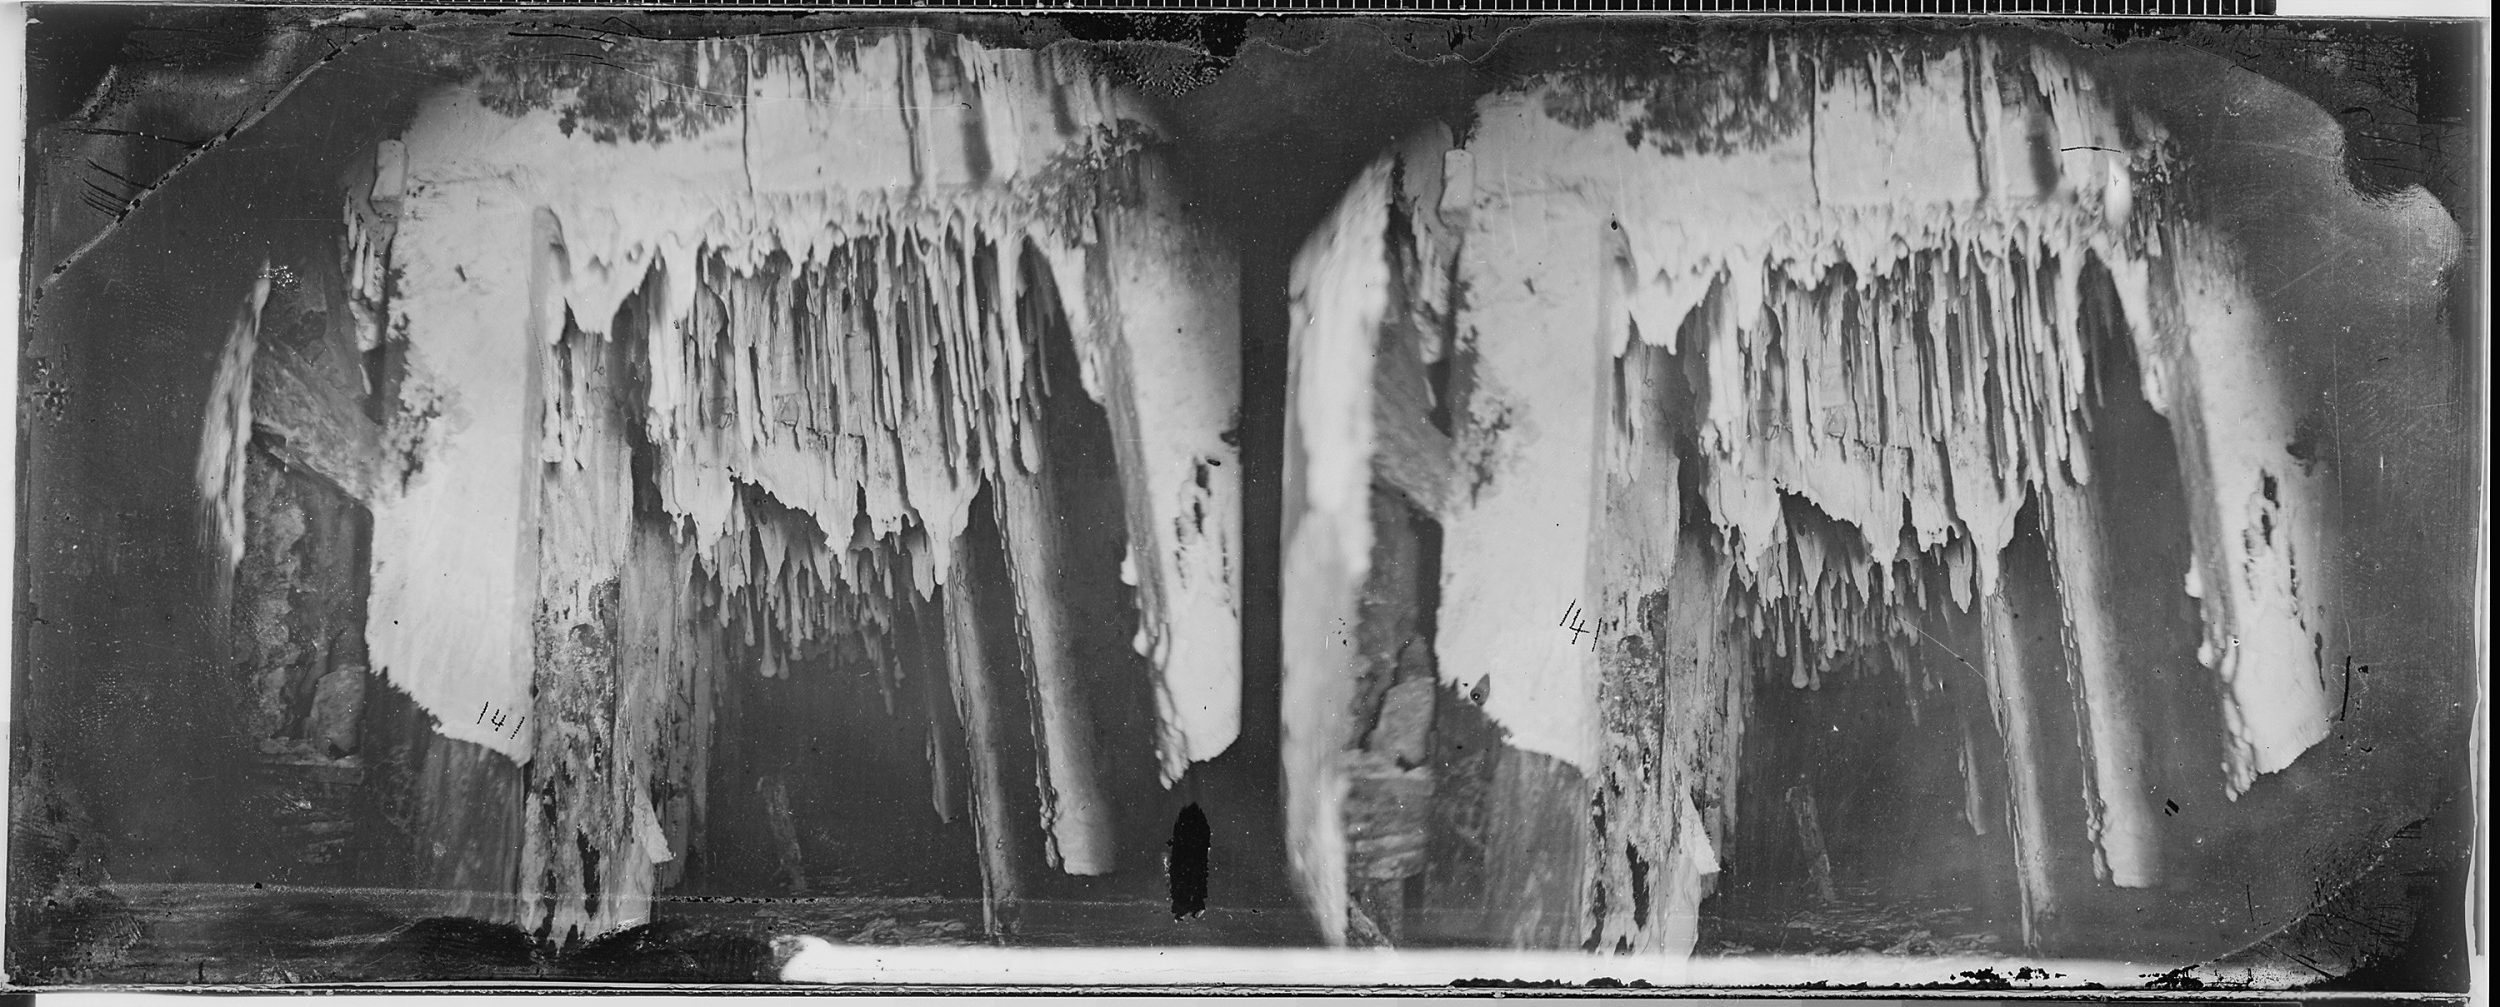 Black-and-white stereoview of the interior of a mine, showing jagged, vertical growths.